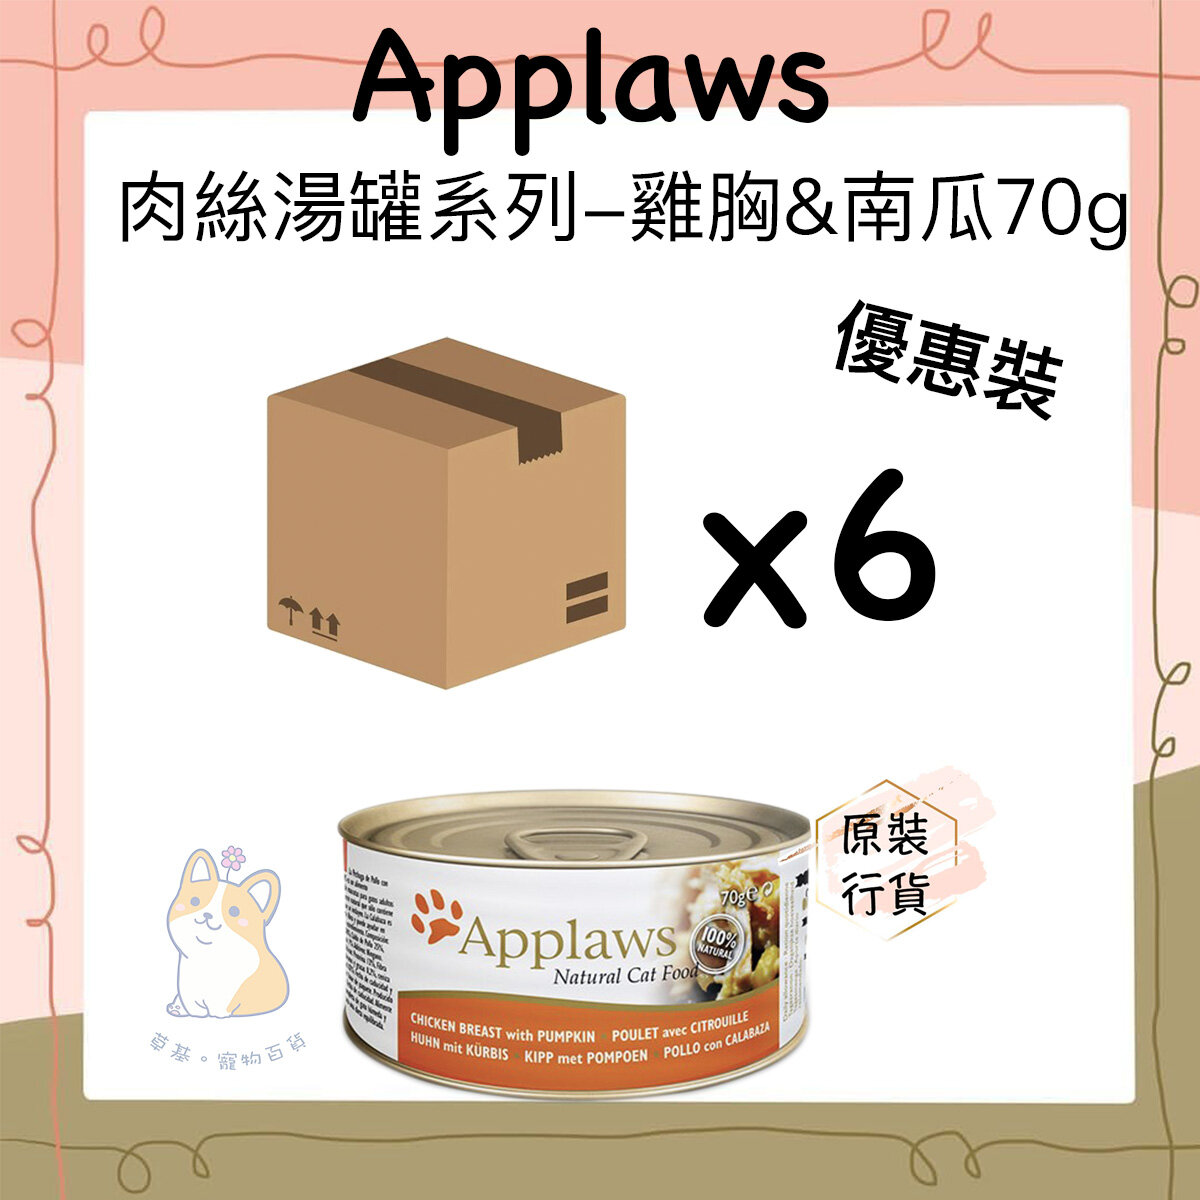 APPLAWS - Broth Cat Tin – Chicken Breast, Pumpkin in Broth 70g x 6 Cans